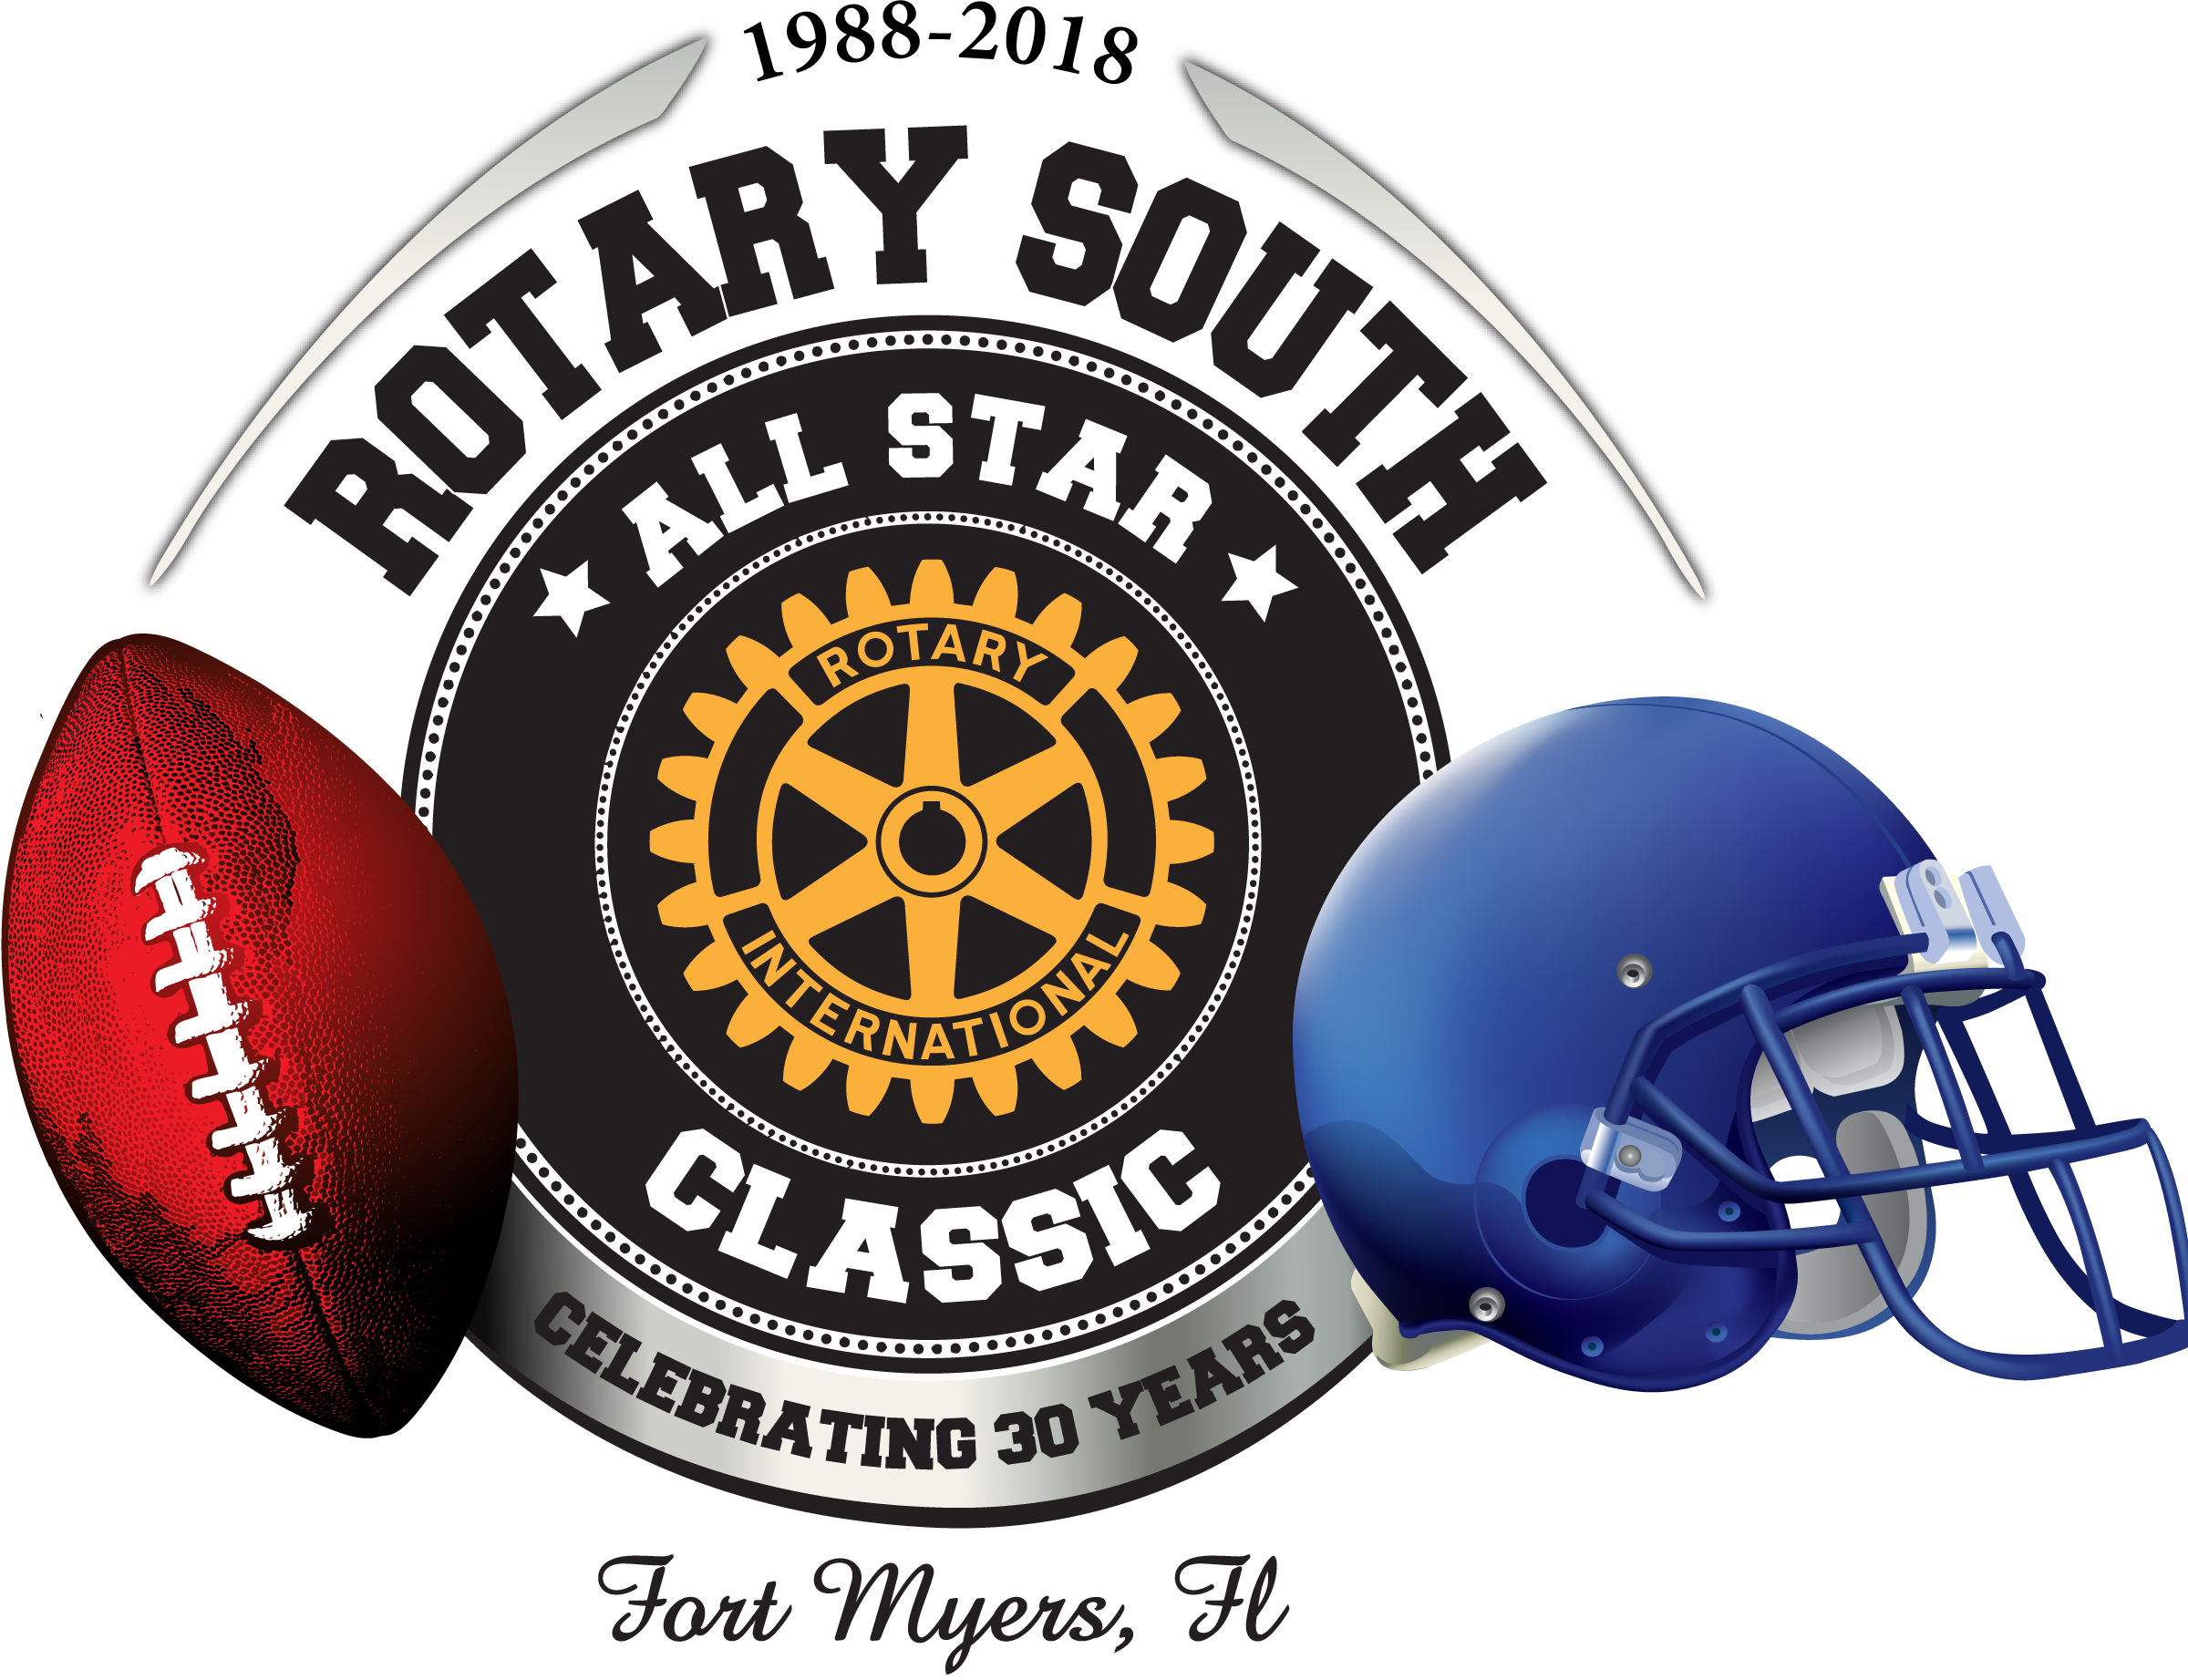 30th Annual Rotary All-Star Classic set for December 5